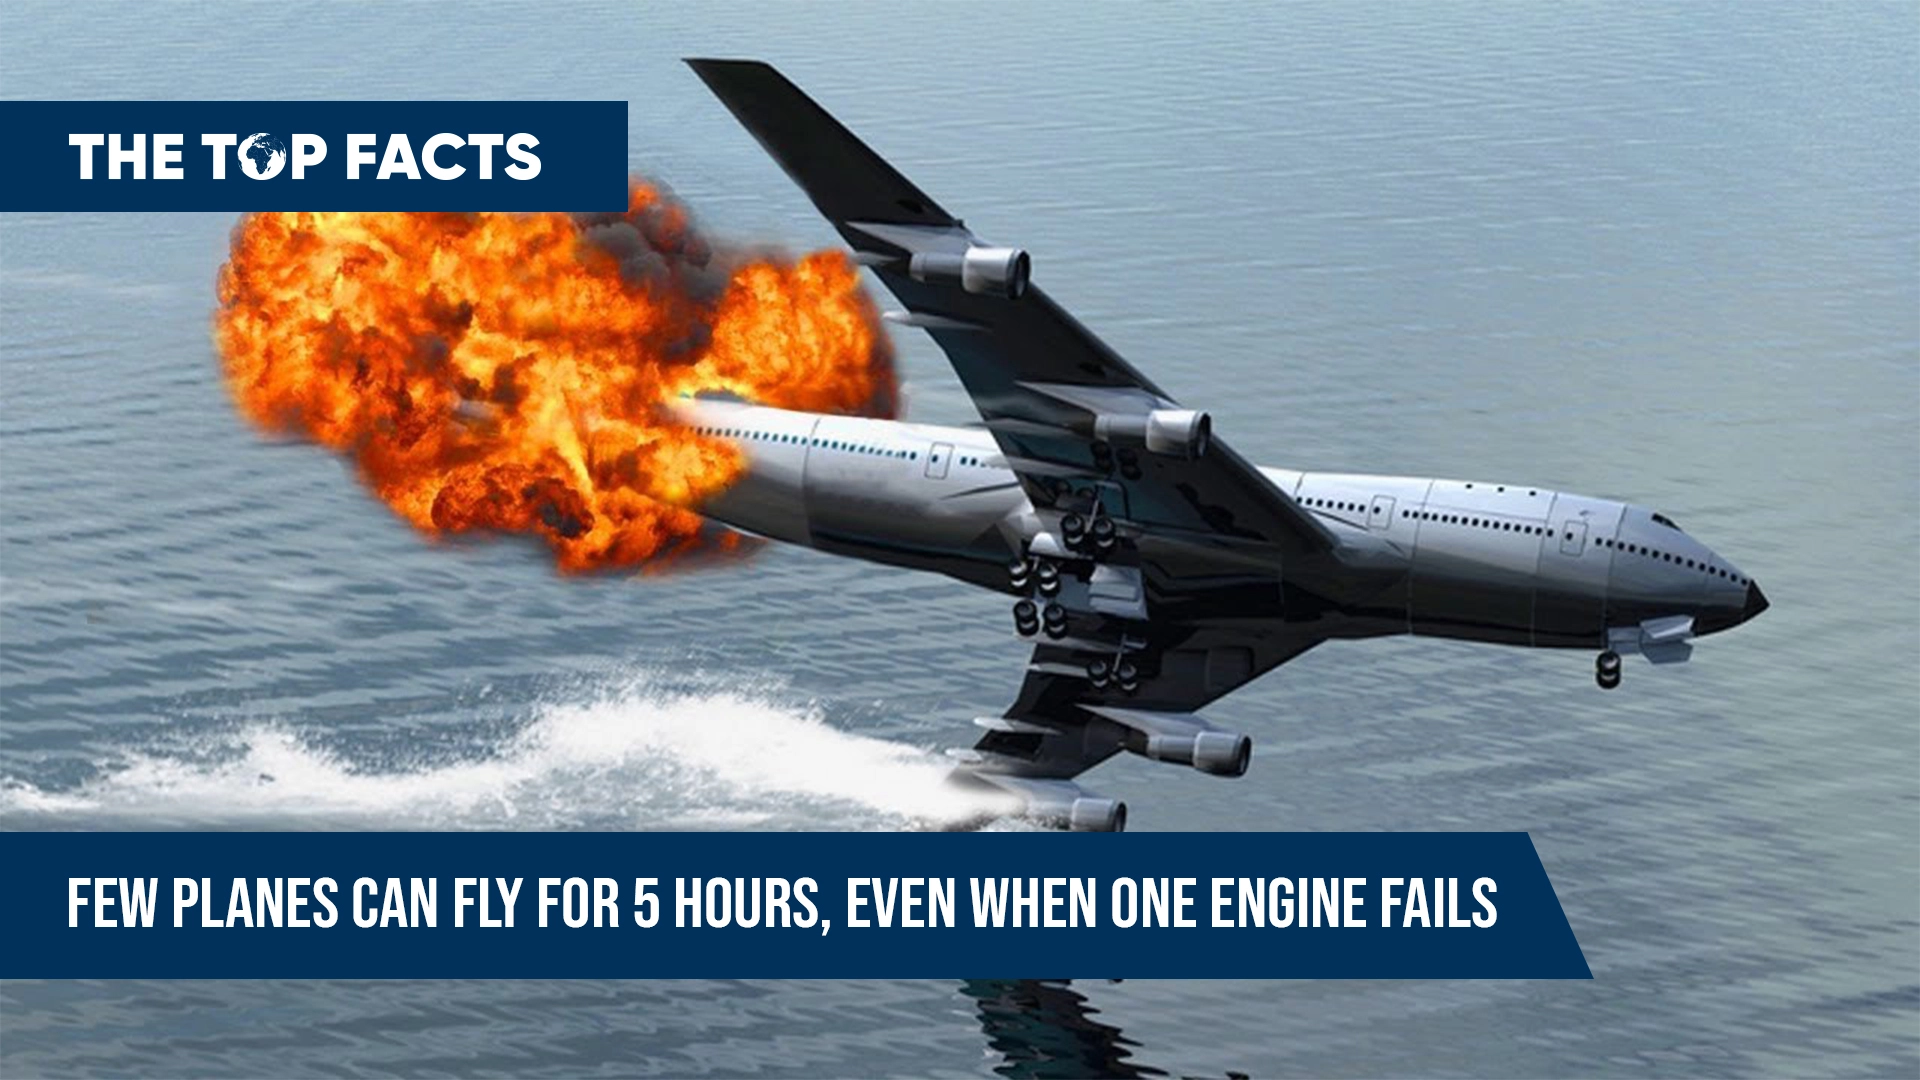 Few planes can fly for 5 hours, even when one engine fails